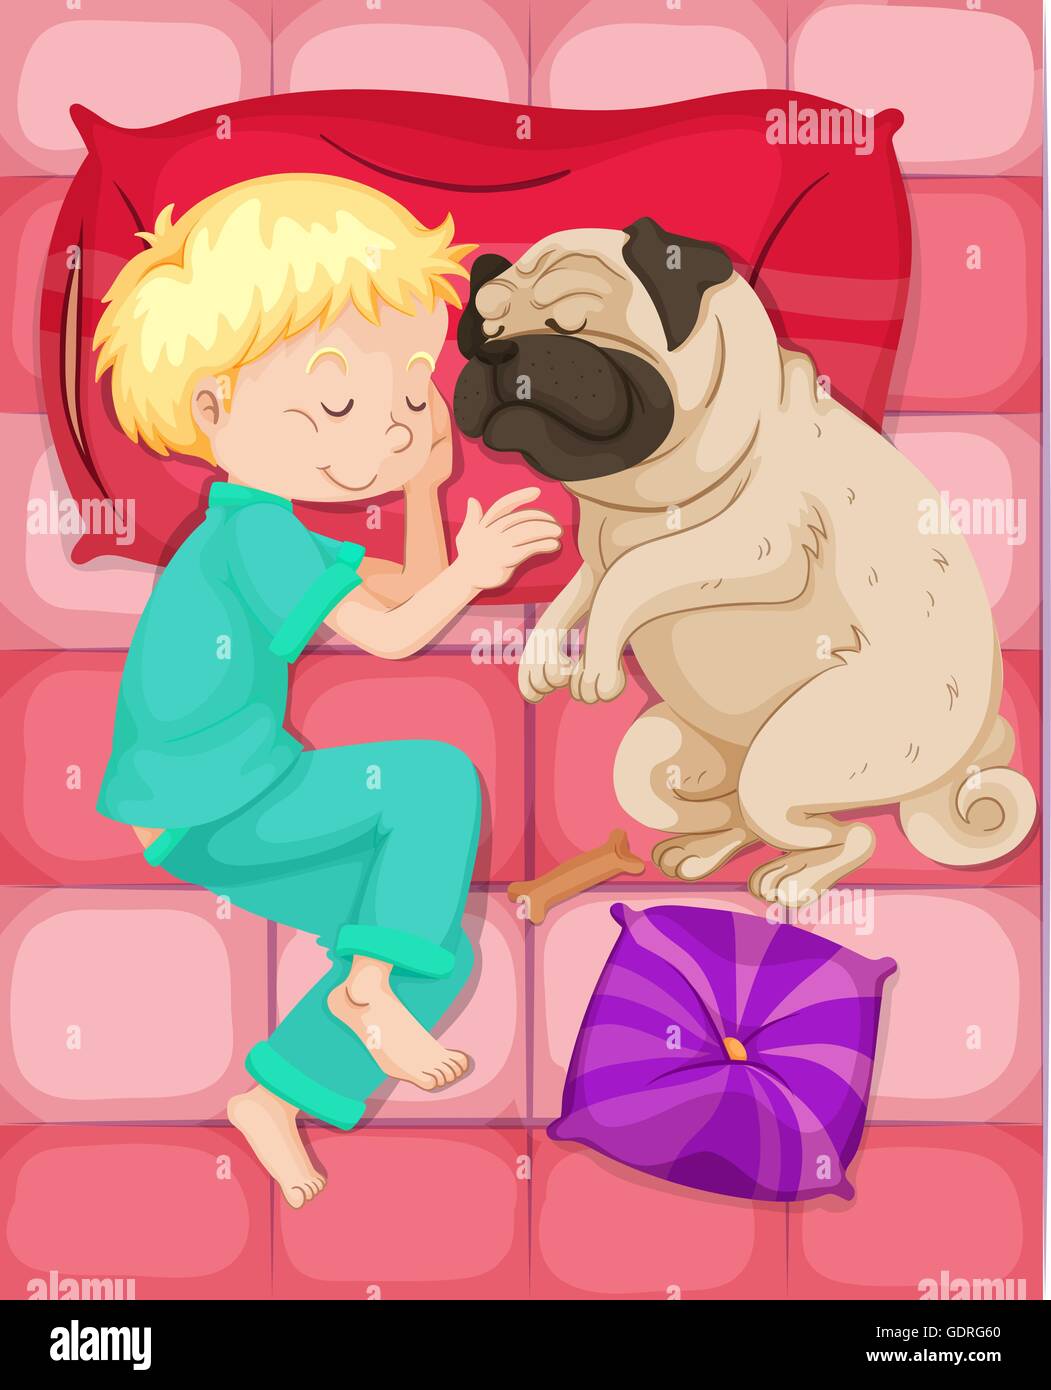 Boy sleeping with pet dog in bed illustration Stock Vector